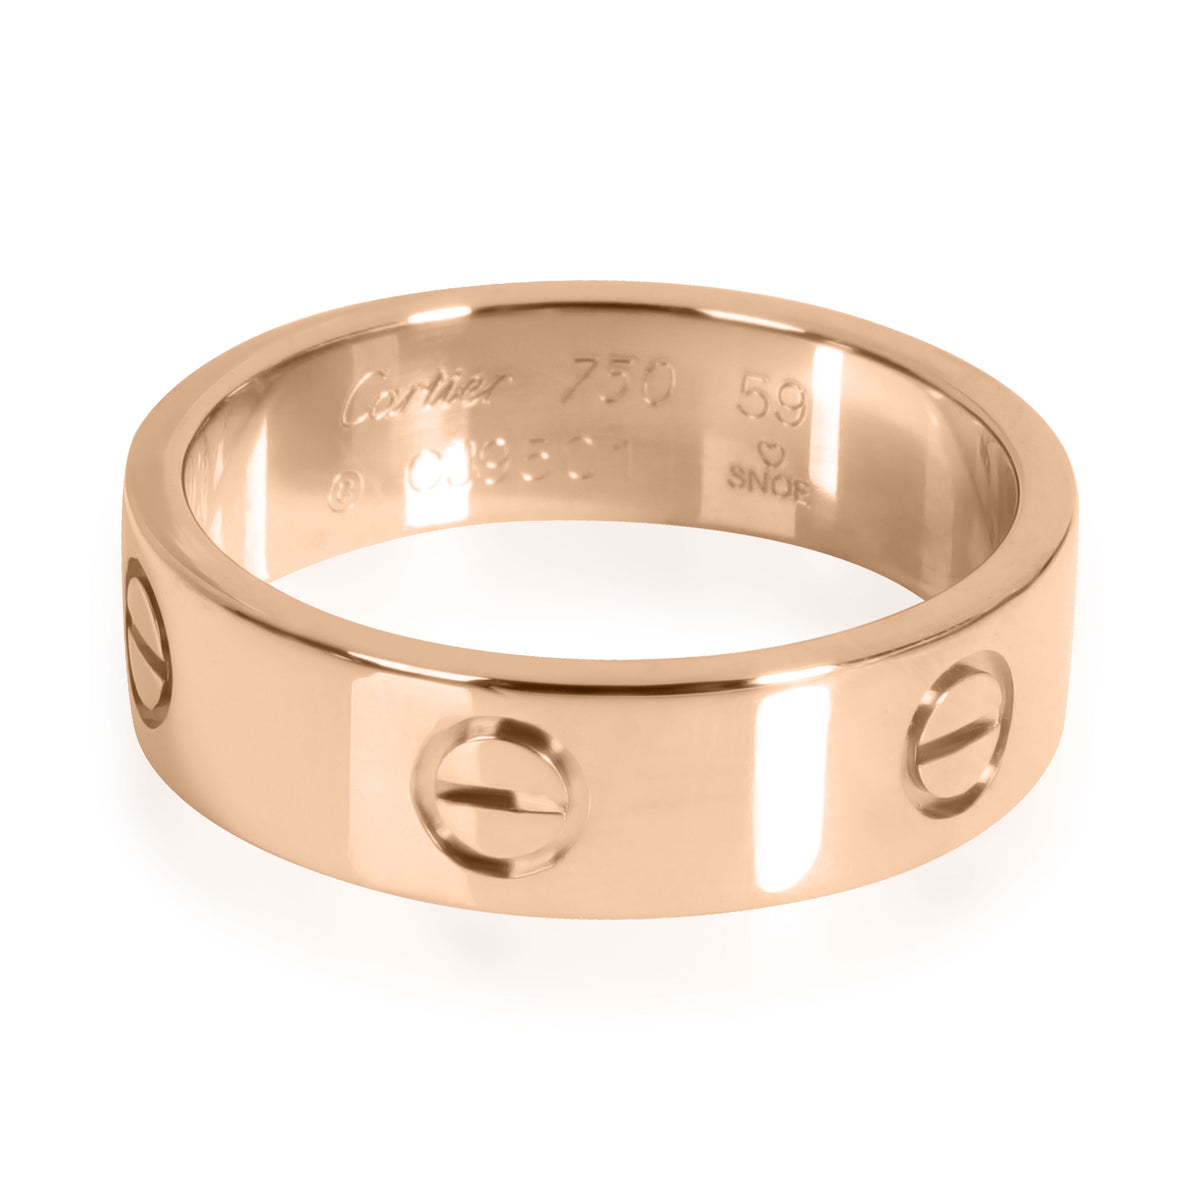 Cartier Love Band in 18K Rose Gold